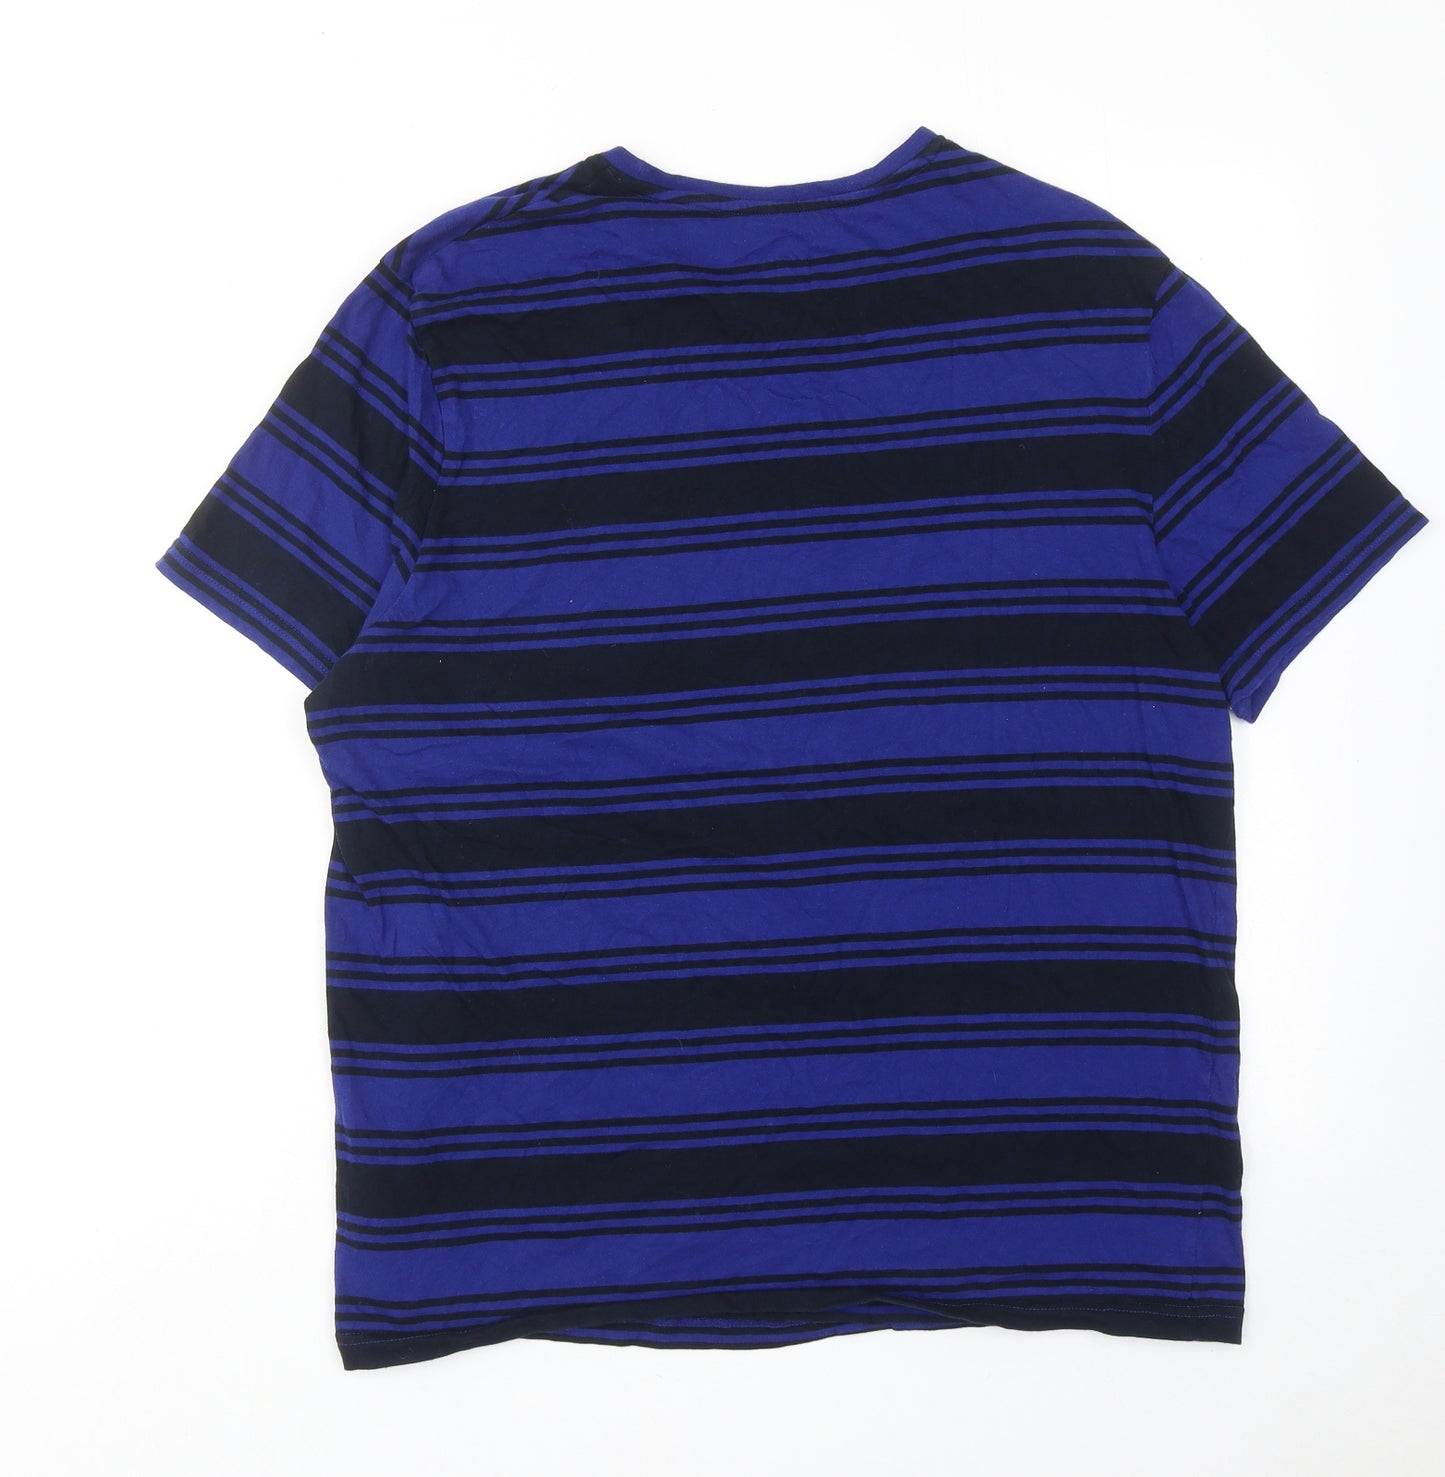 Marks and Spencer Mens Blue Striped Cotton T-Shirt Size M Round Neck